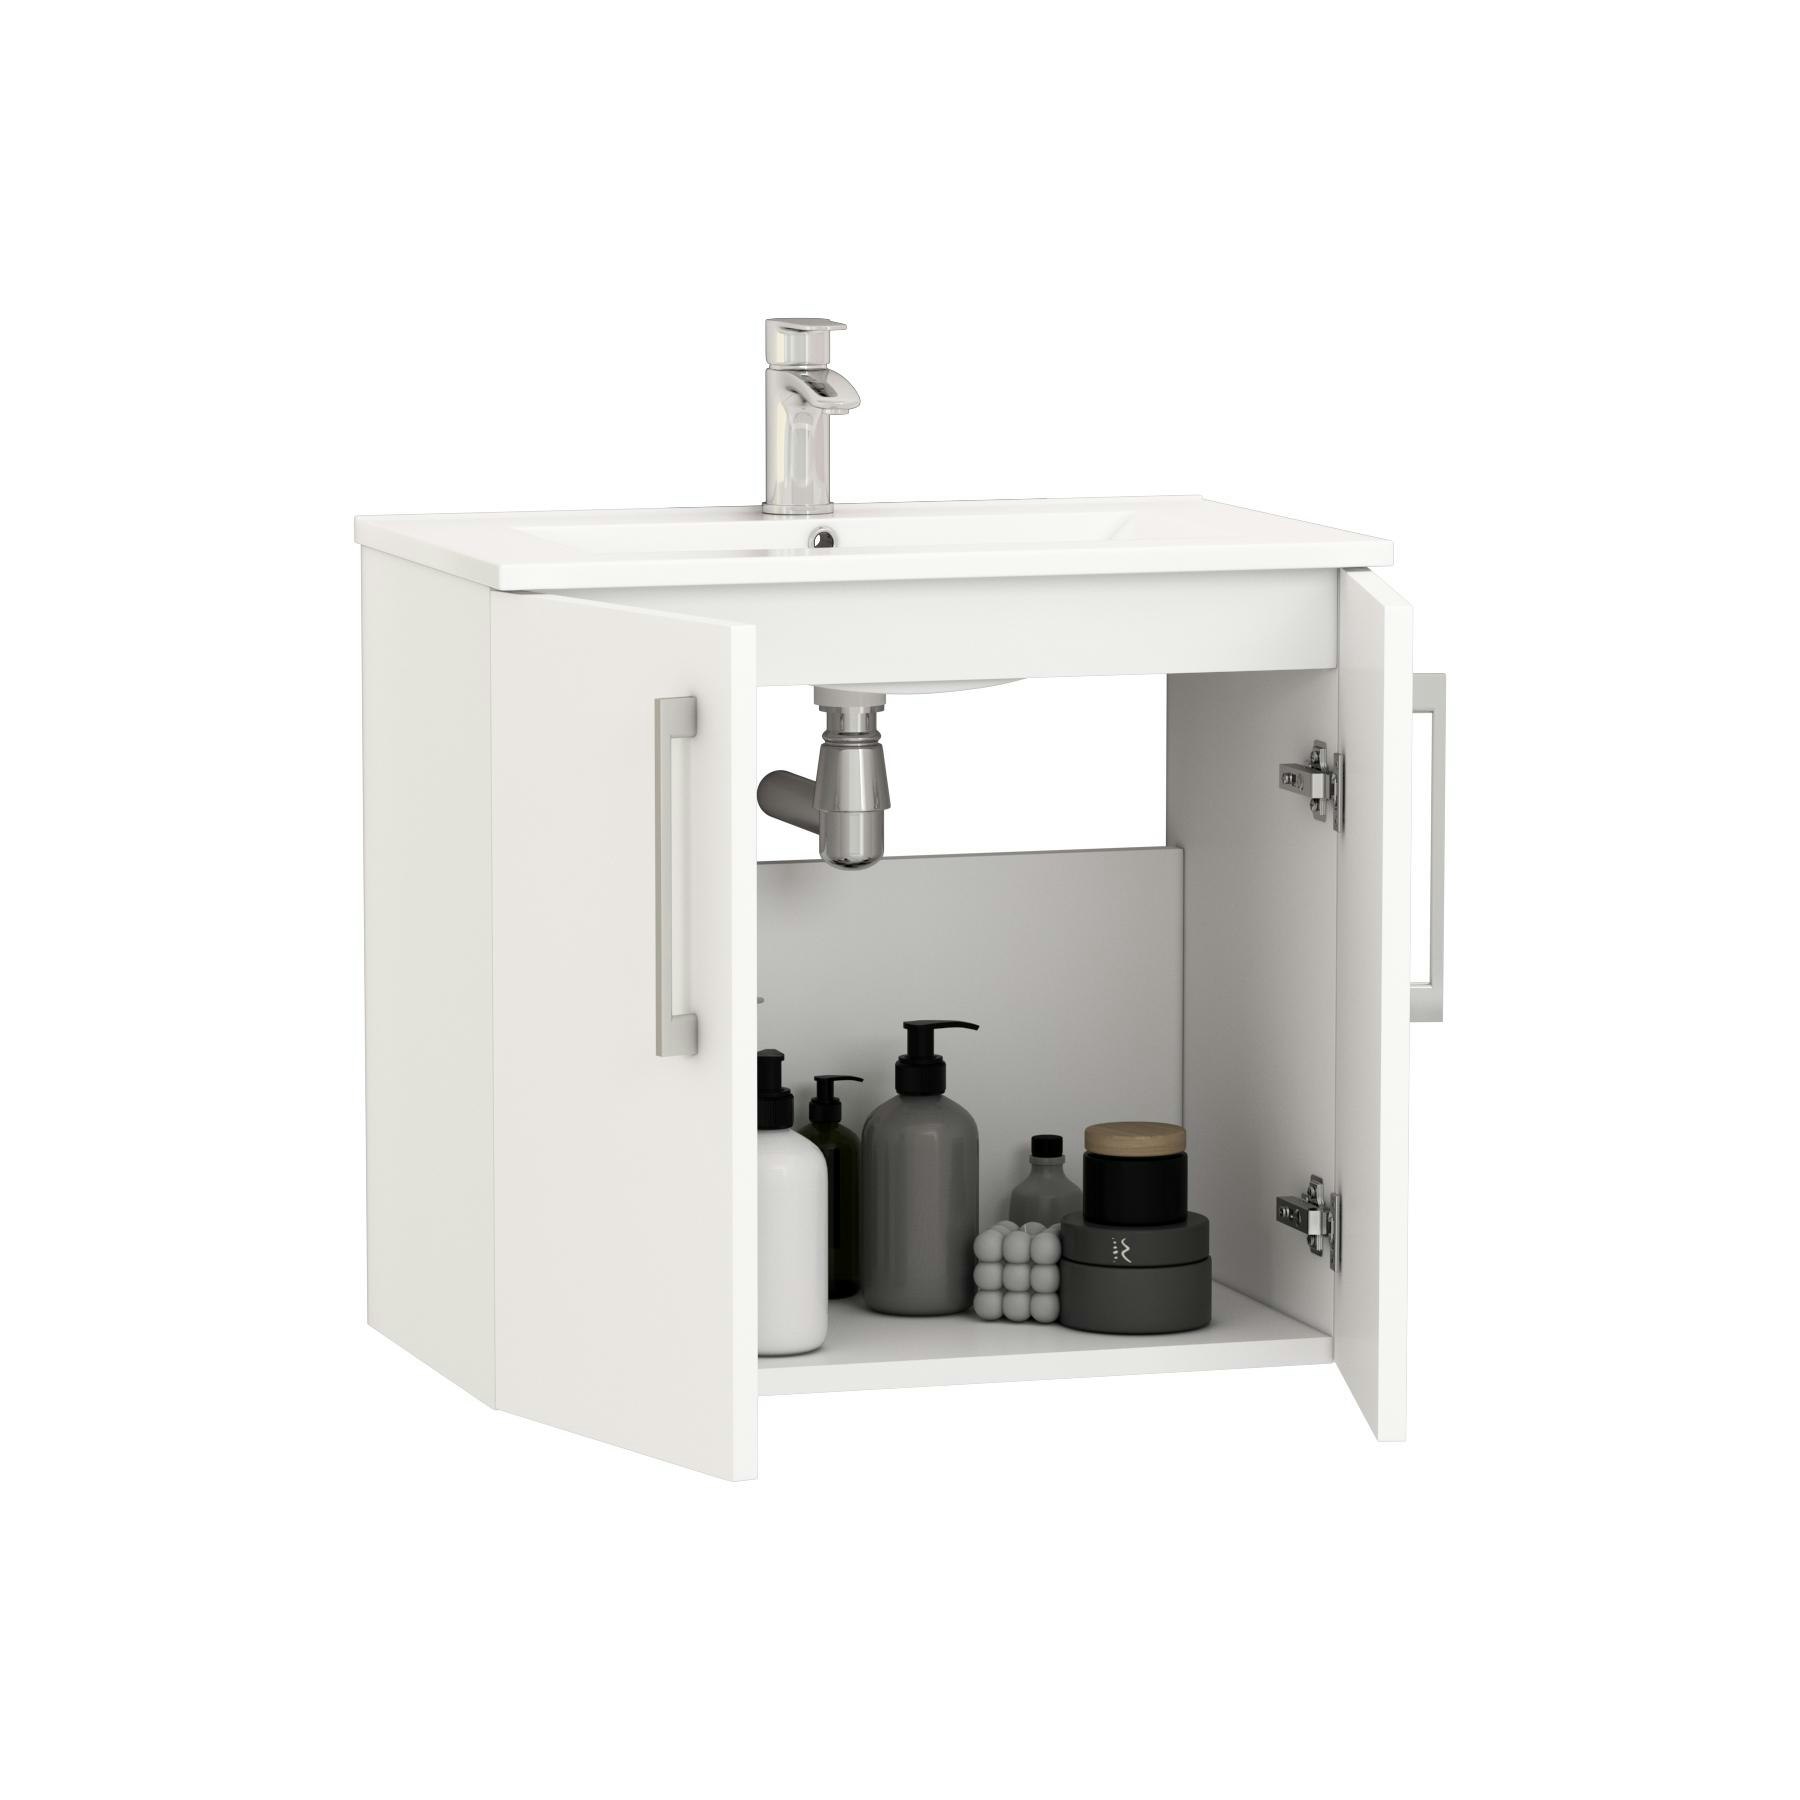 Modena 600mm Satin White Wall Hung Vanity Unit 2 Door Cabinet with Mid-Edge Basin